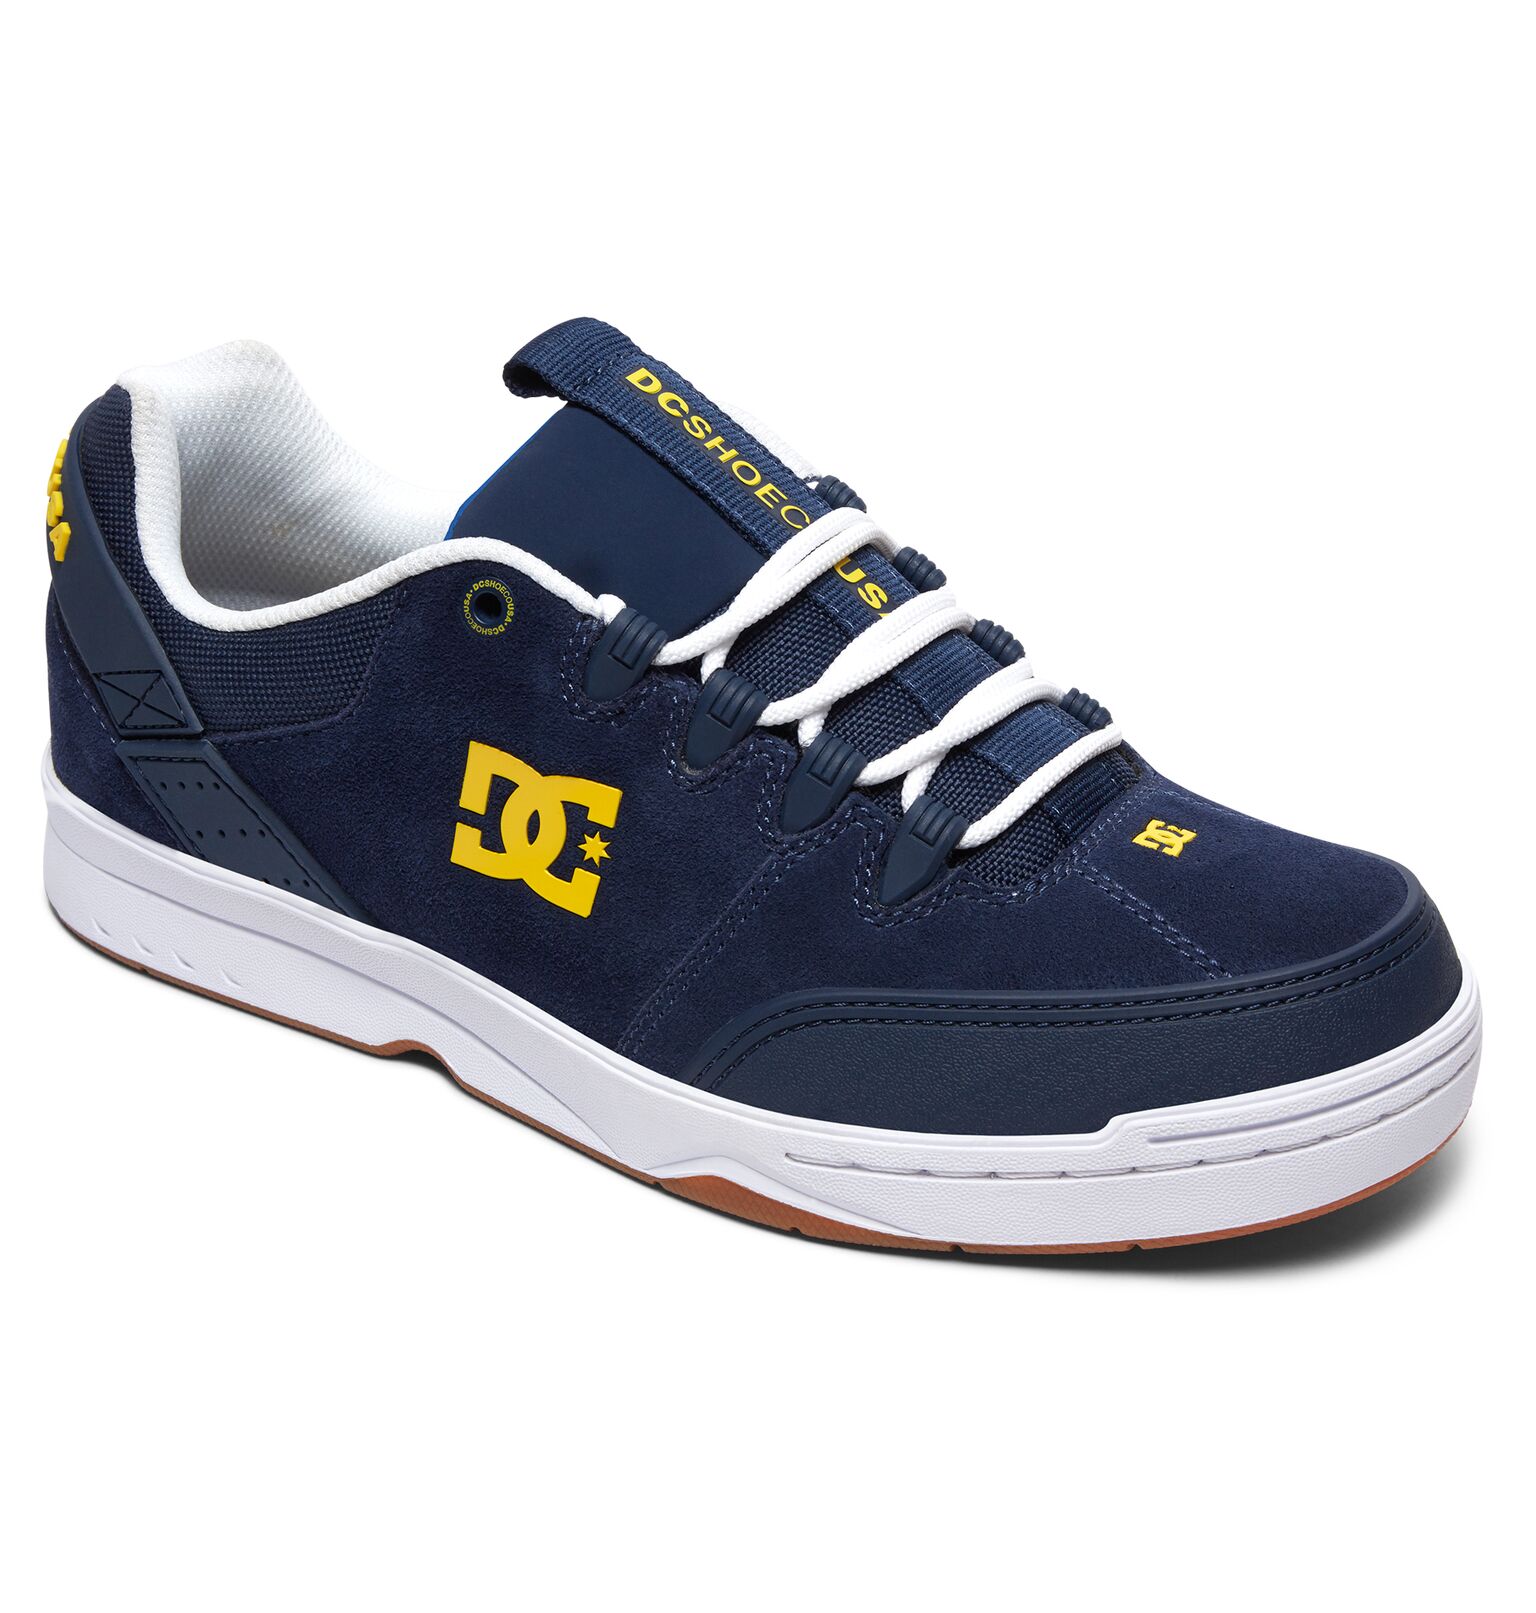 DC Shoes 94 collection syntax